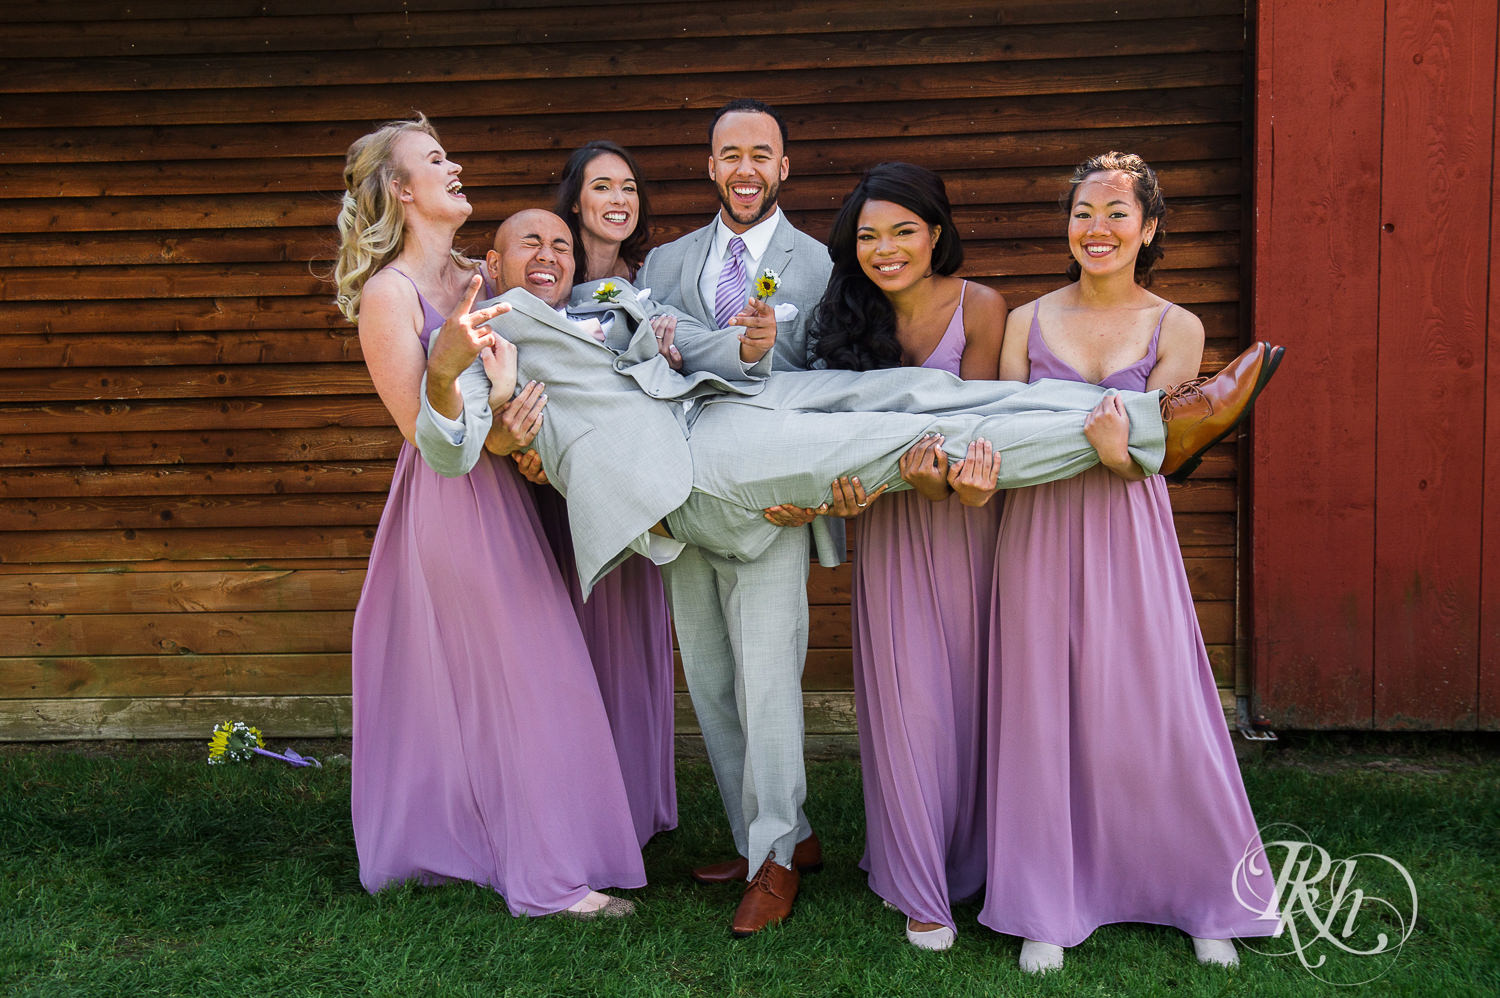 Wedding party smiles holding groom during barn wedding at Birch Hill Barn in Glenwood City, Wisconsin.